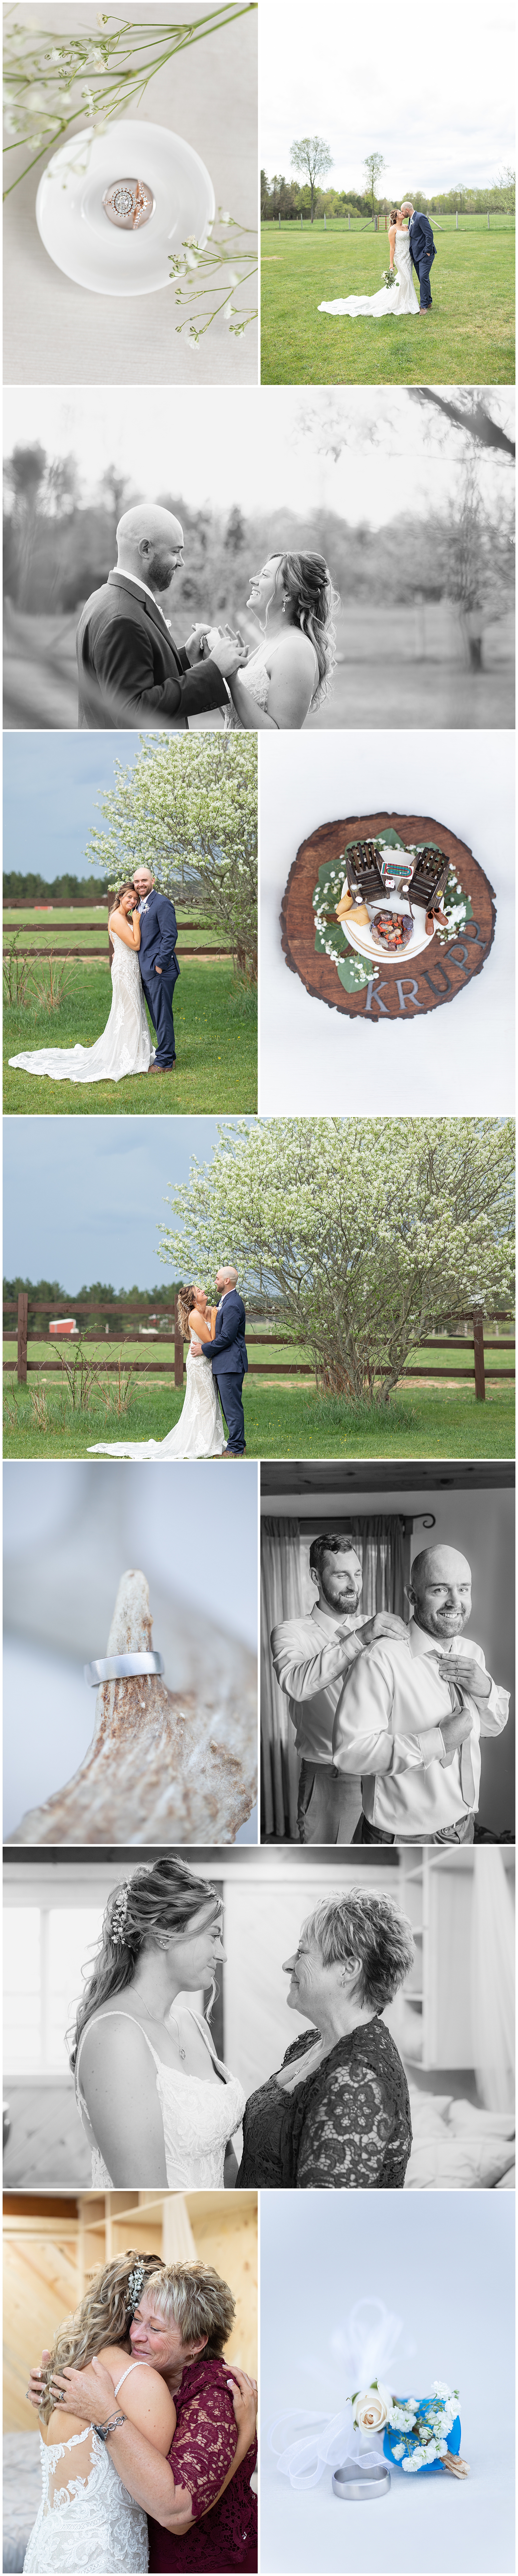 Collage of Midwestern Wedding Portraits, Rustic Wedding Details, First Look and more 